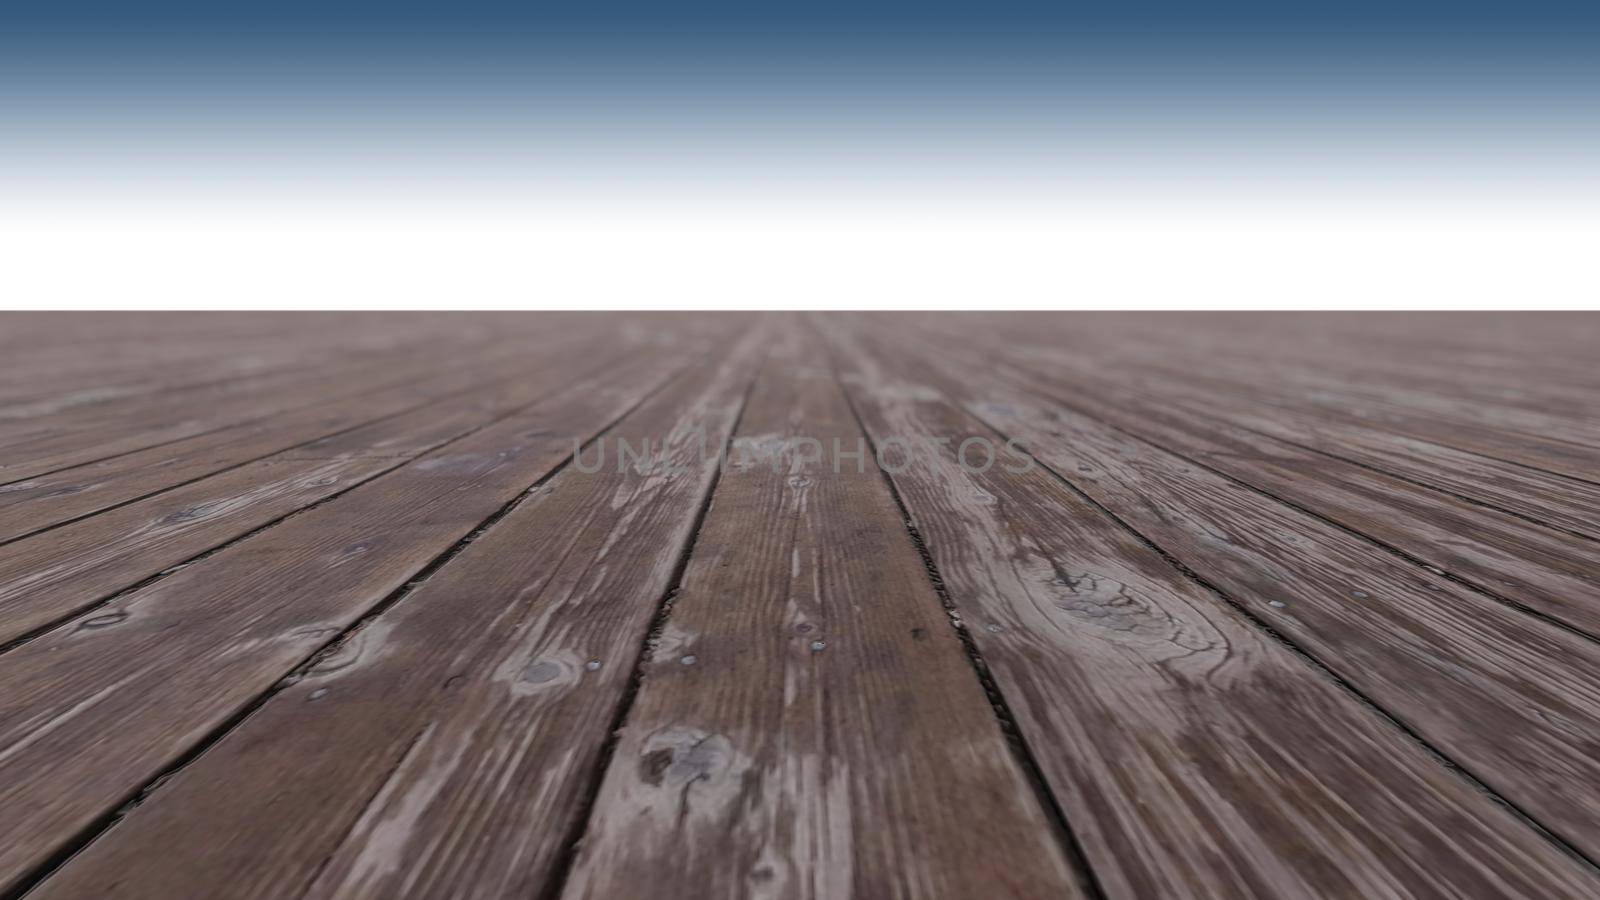 A 3d rendering image of wooden floor. Mockup sky and background. Scene creator in smart object layer.